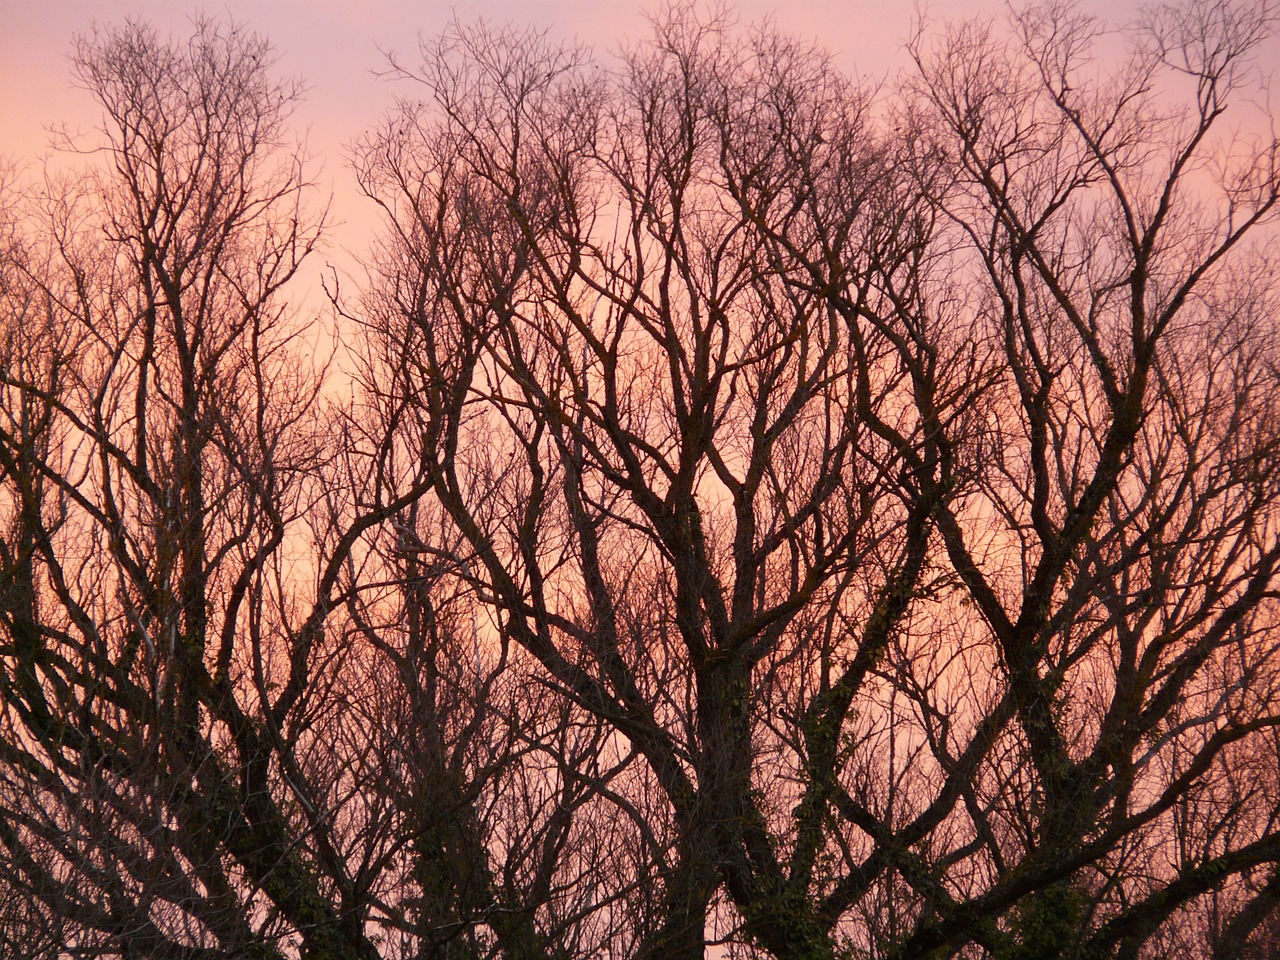 afterglow,trees,branches,aesthetic,nature,landscape,sky,sunset,red,pink,free pictures, free photos, free images, royalty free, free illustrations, public domain